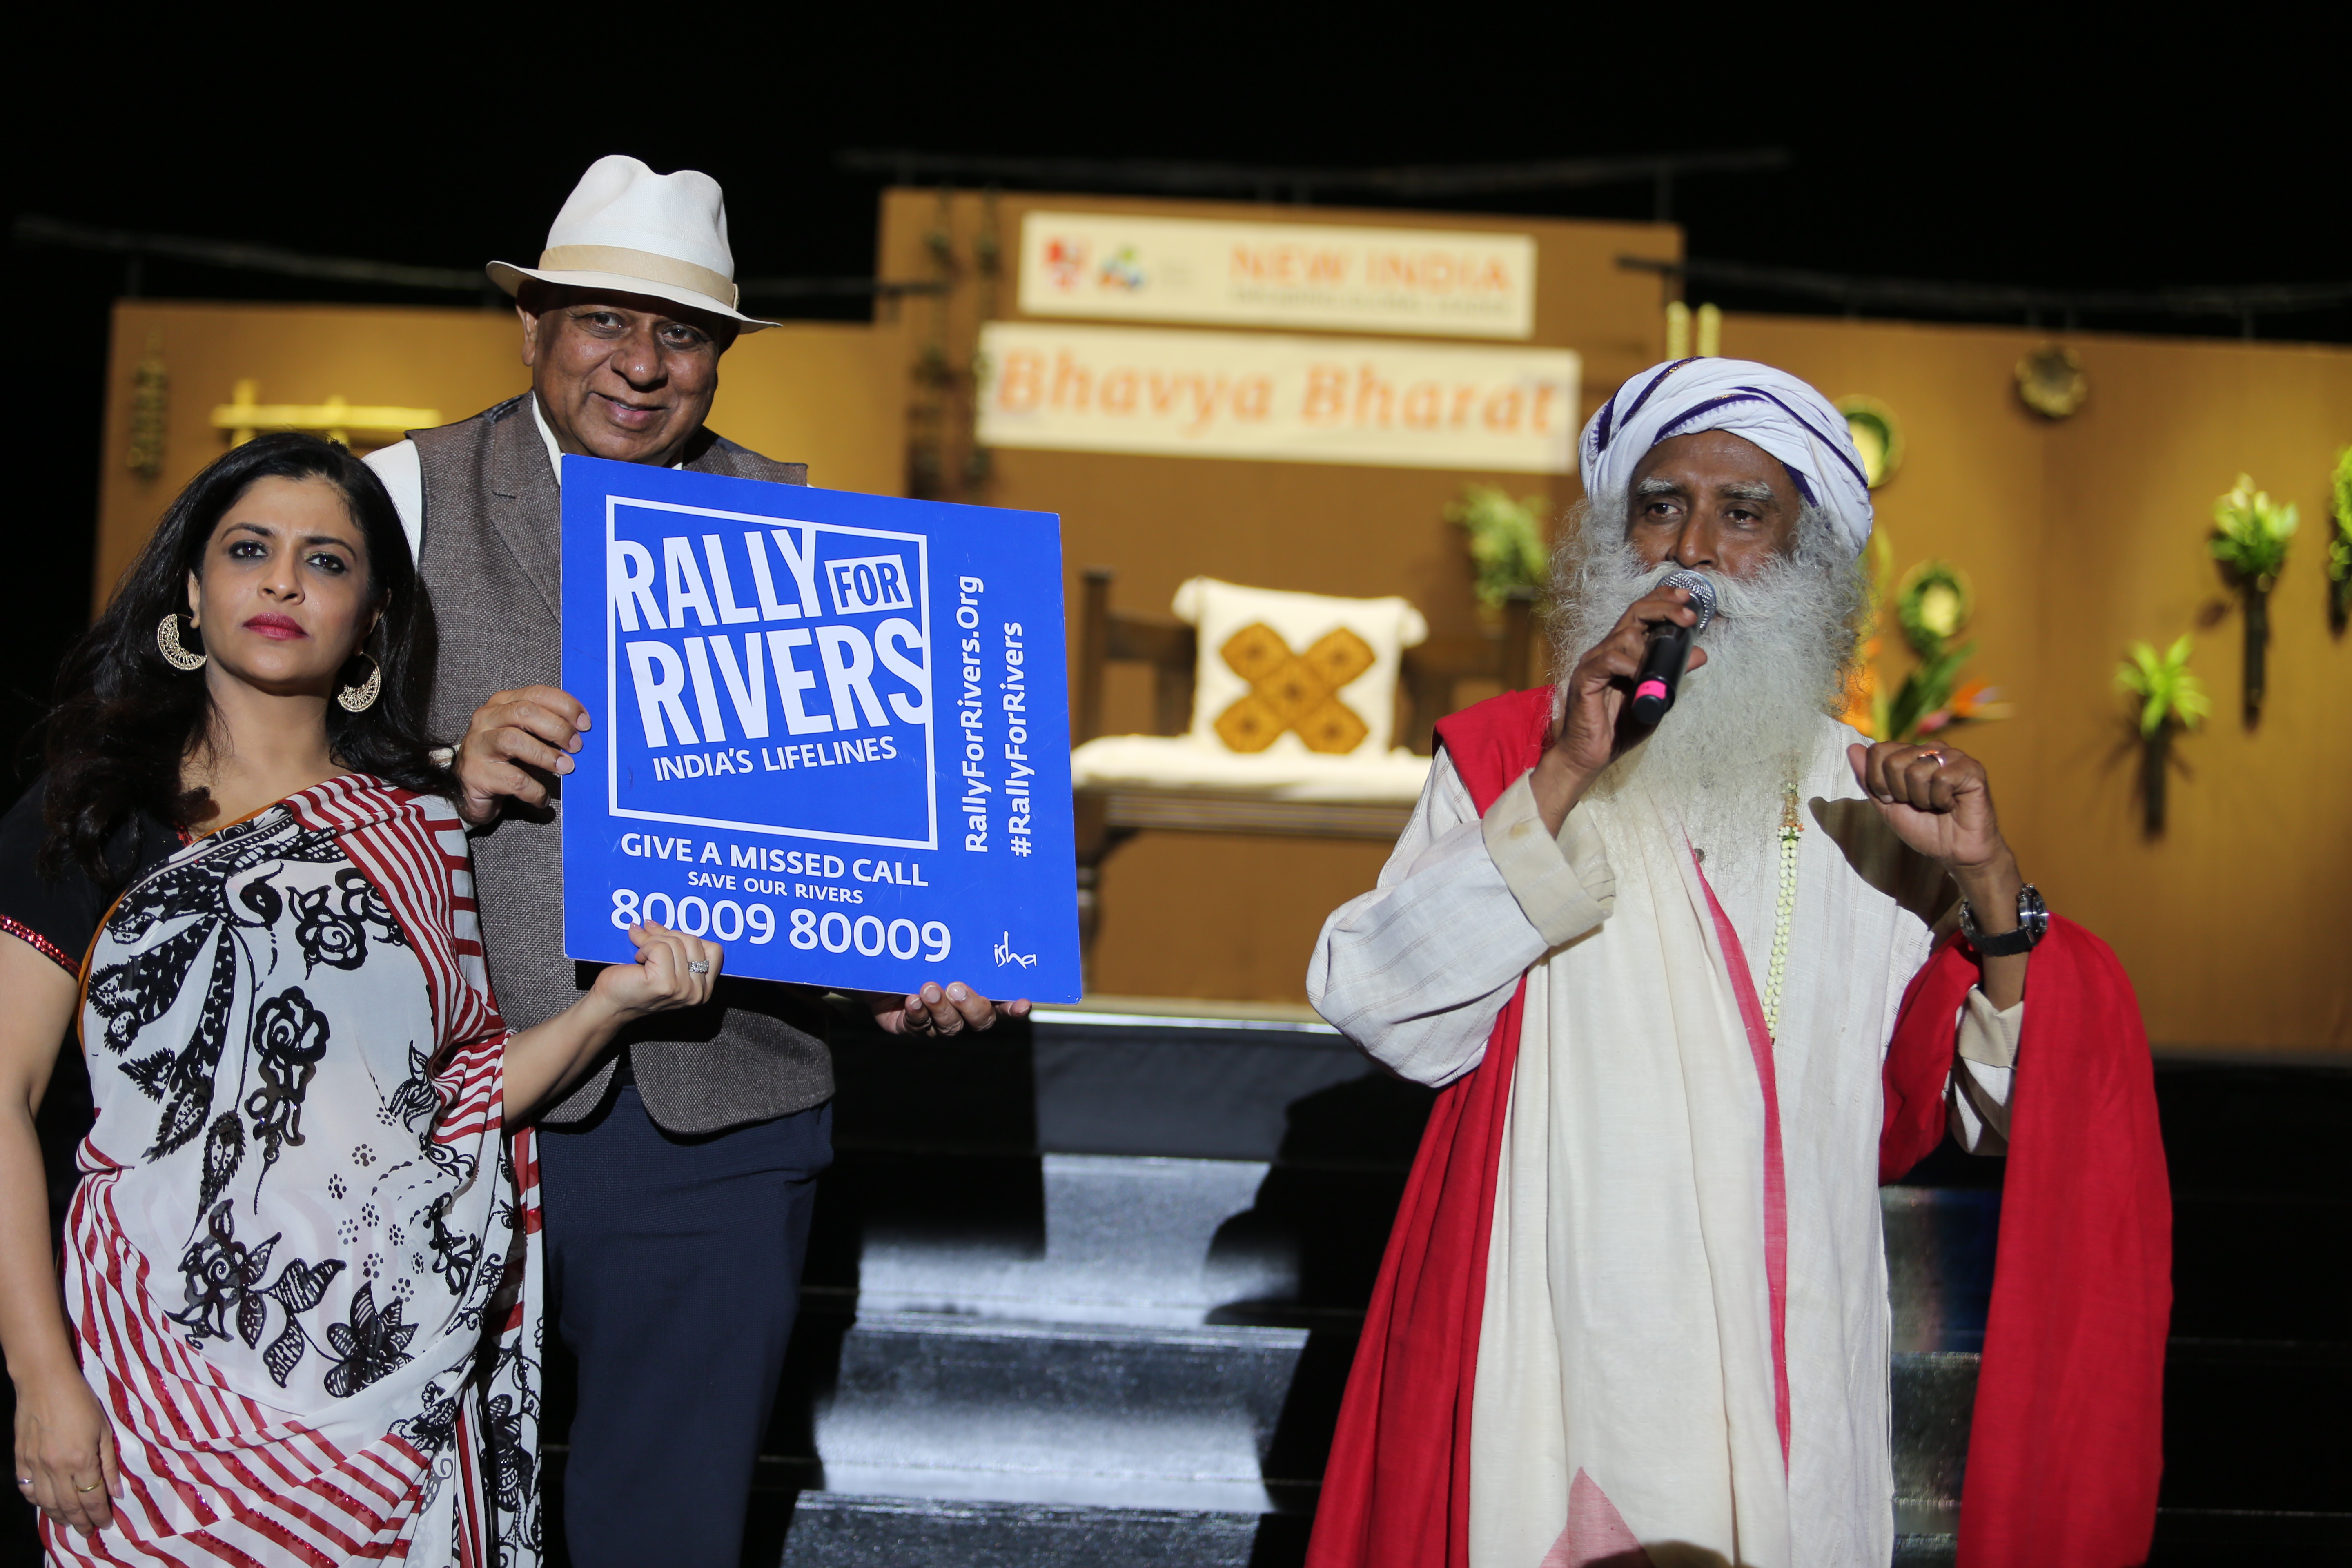 GCF Founder Dr M, GCF Spokesperson Shazia Ilmi and Sadhguru Shri Jaggi Vasudeva lead the call for New India with a message for the environment. The event was attended by more than 8000 Global Indians.